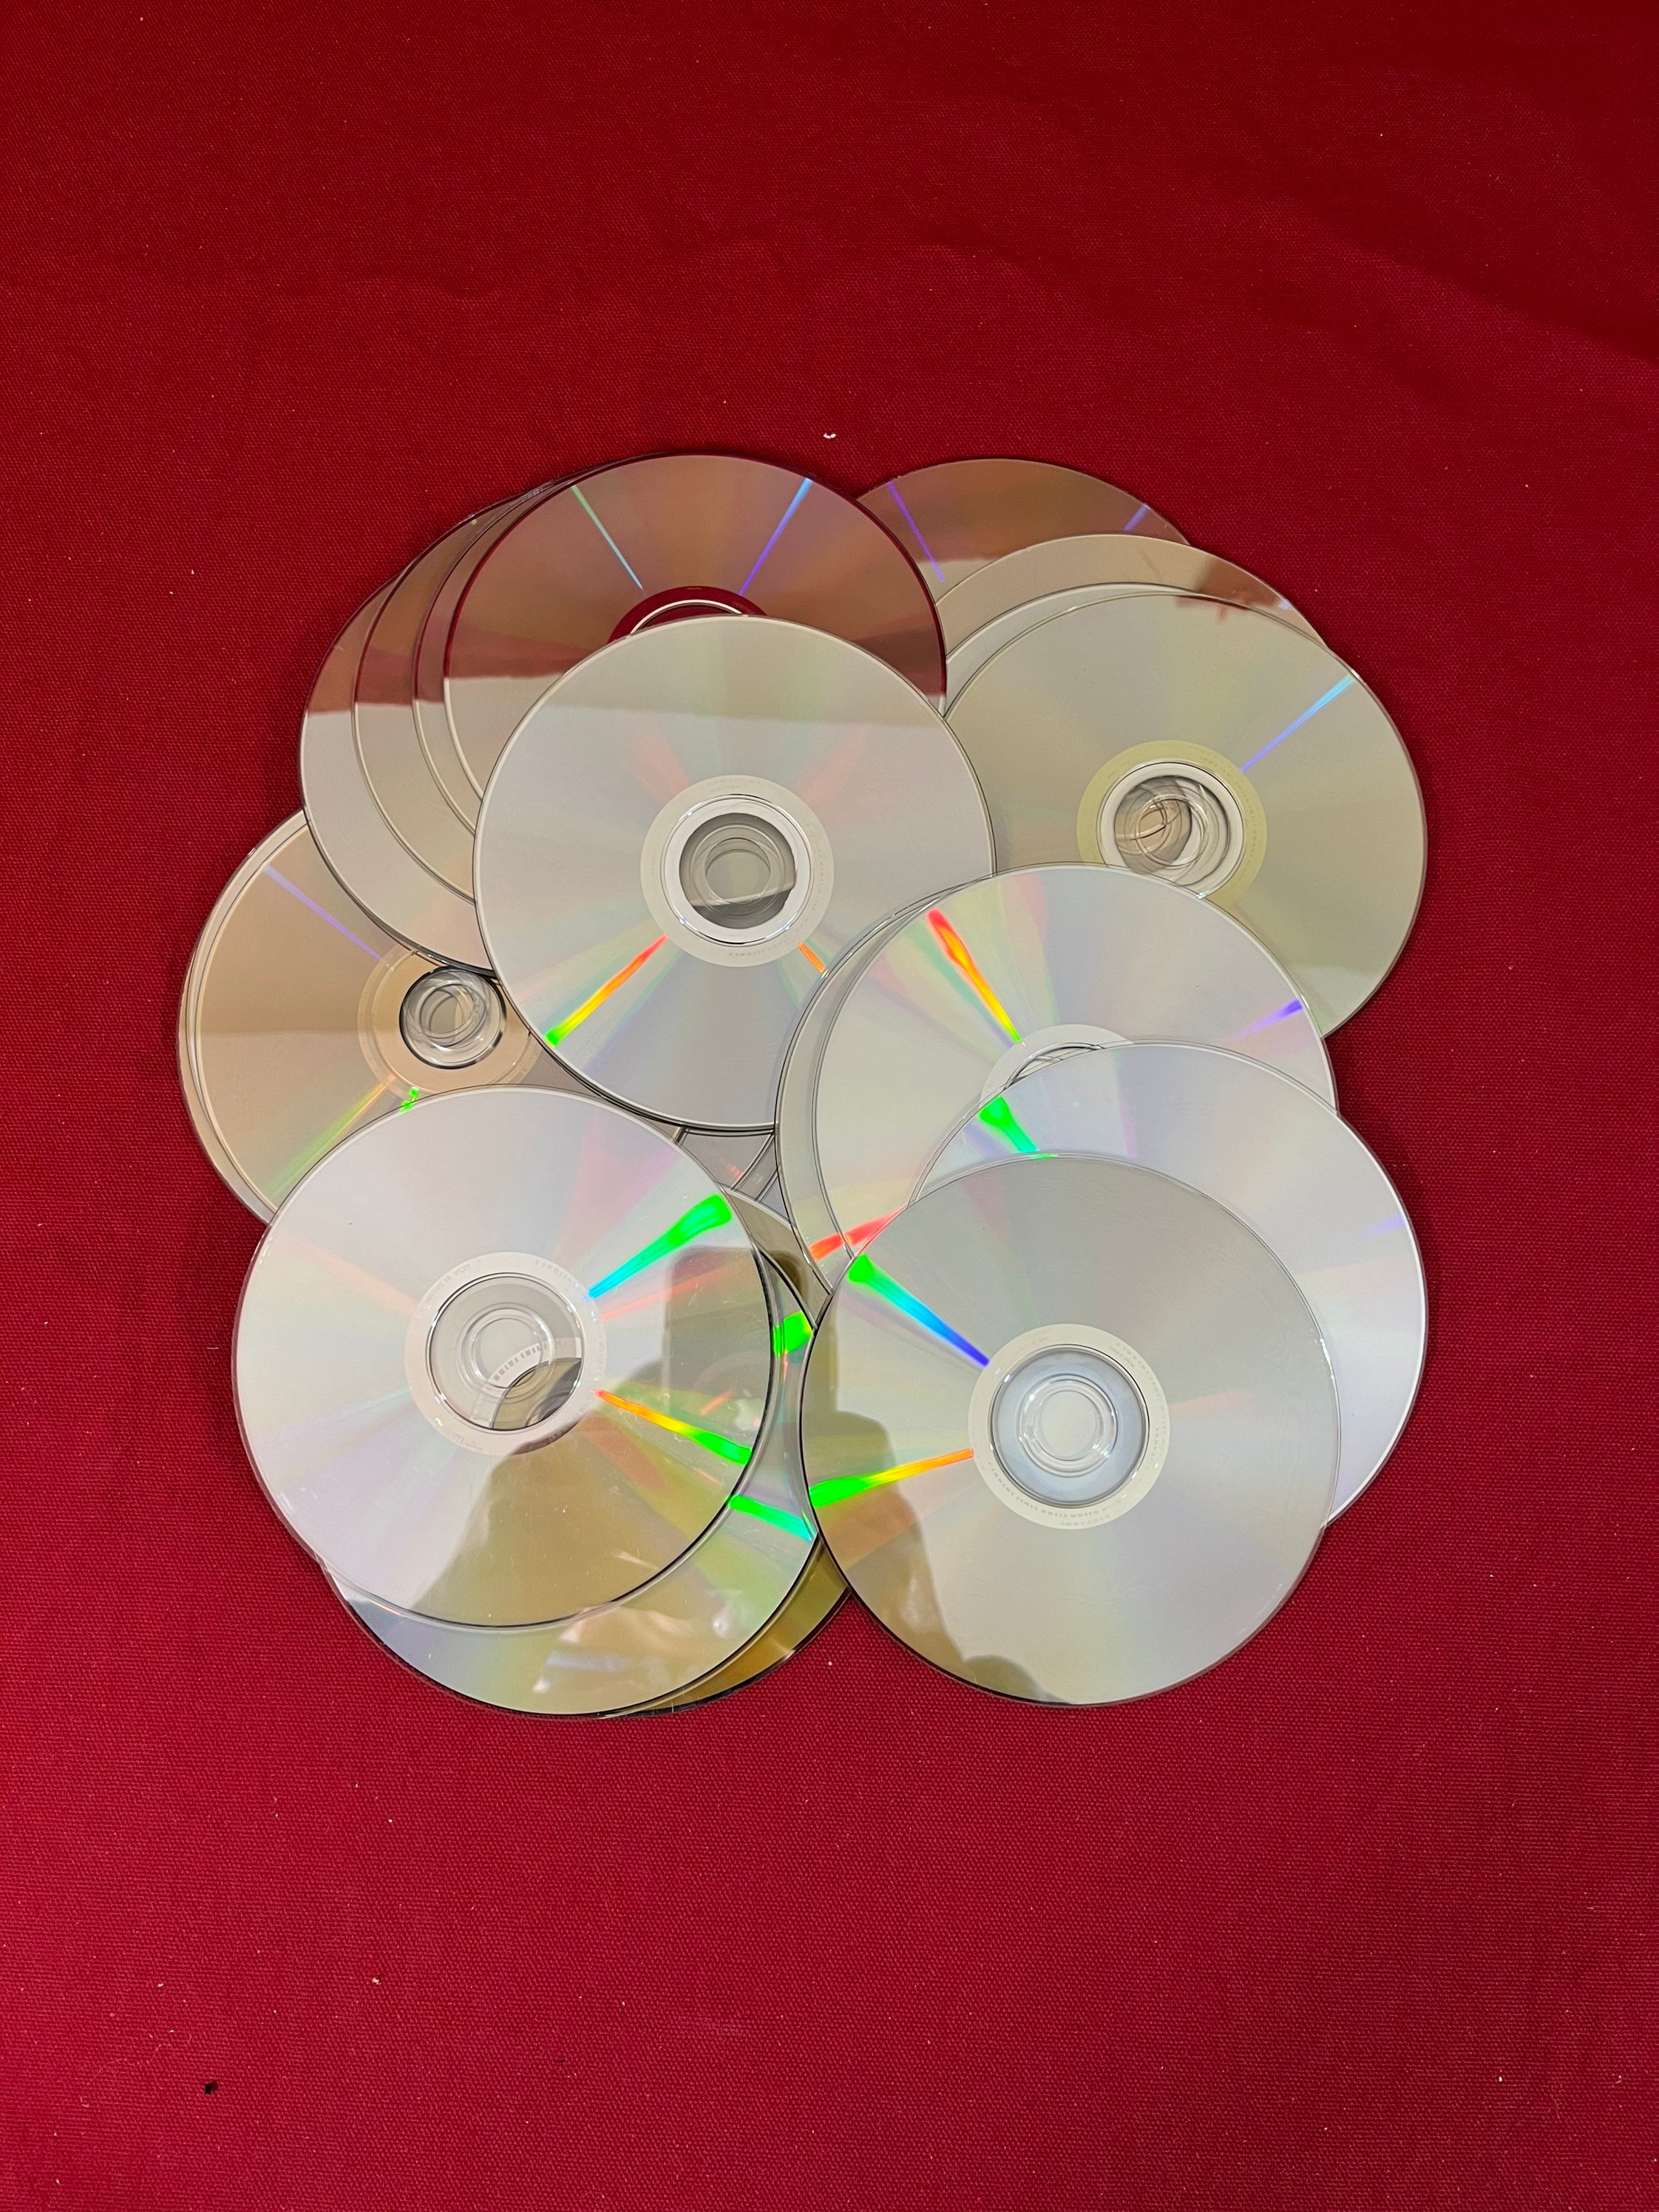  NOLITOY 10pcs Party Supplies Crafts Decor Blank Cds  Mltifunctional Cd Discs Blank Discs Cd Discs for Home Shop DIY Cd Discs  Craft Material Discarded Cd Discs Cds Blank Pack Simple Plastic 